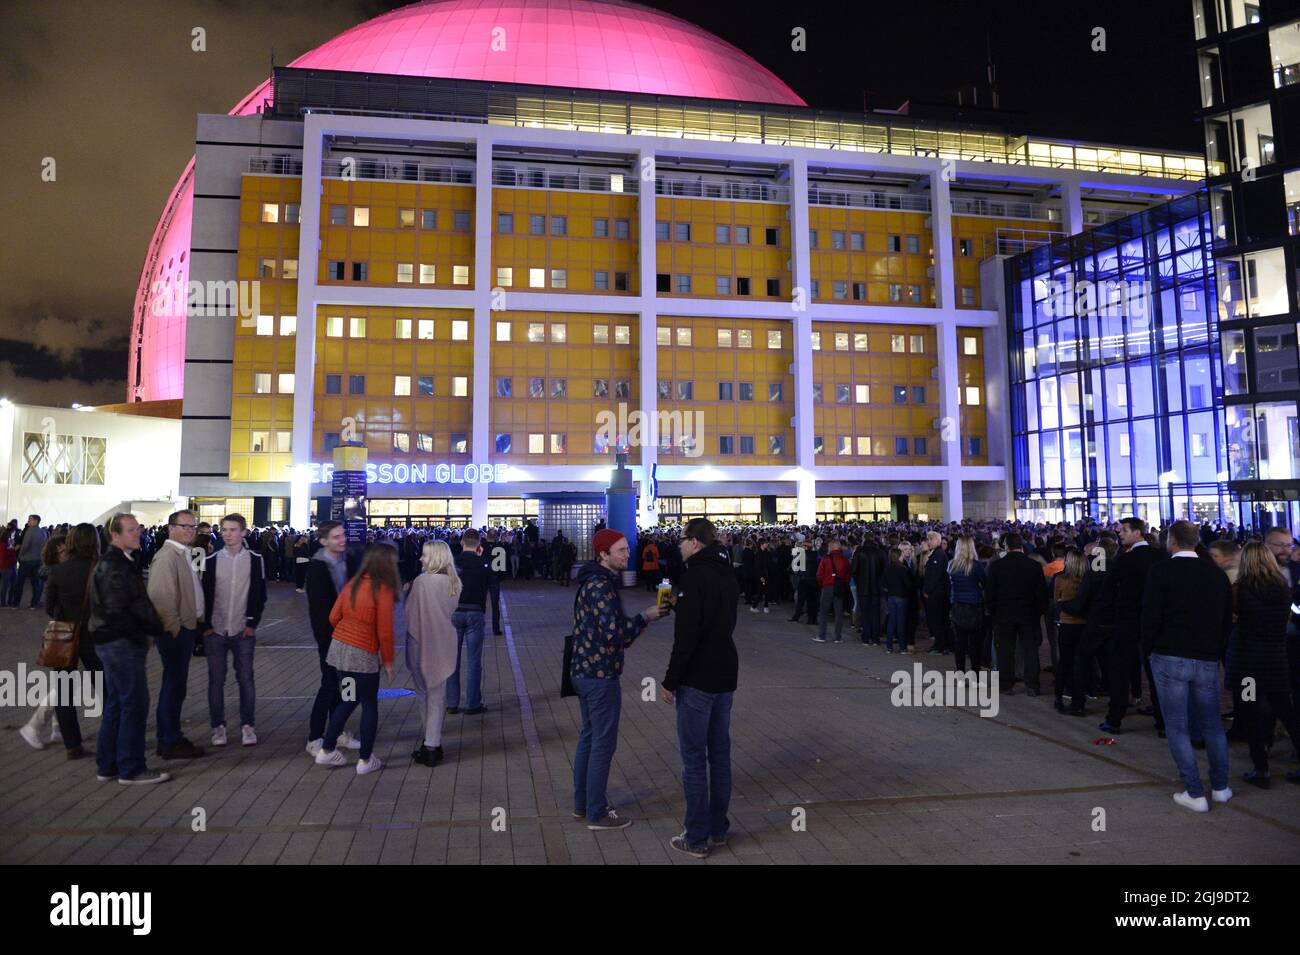 STOCKHOLM 2015-09-20 People wait in line to get in to the U2 concert at the Ericsson Globe Arena in Stockholm, Sweden, September 20, 2015. After a two hour long delay, an evacuation of the arena and extra security checks Sundays U2 concert was finally cancelled. The concert will be held Tuesday. Photo: Pontus Lundahl / TT / Code 10050 Stock Photo